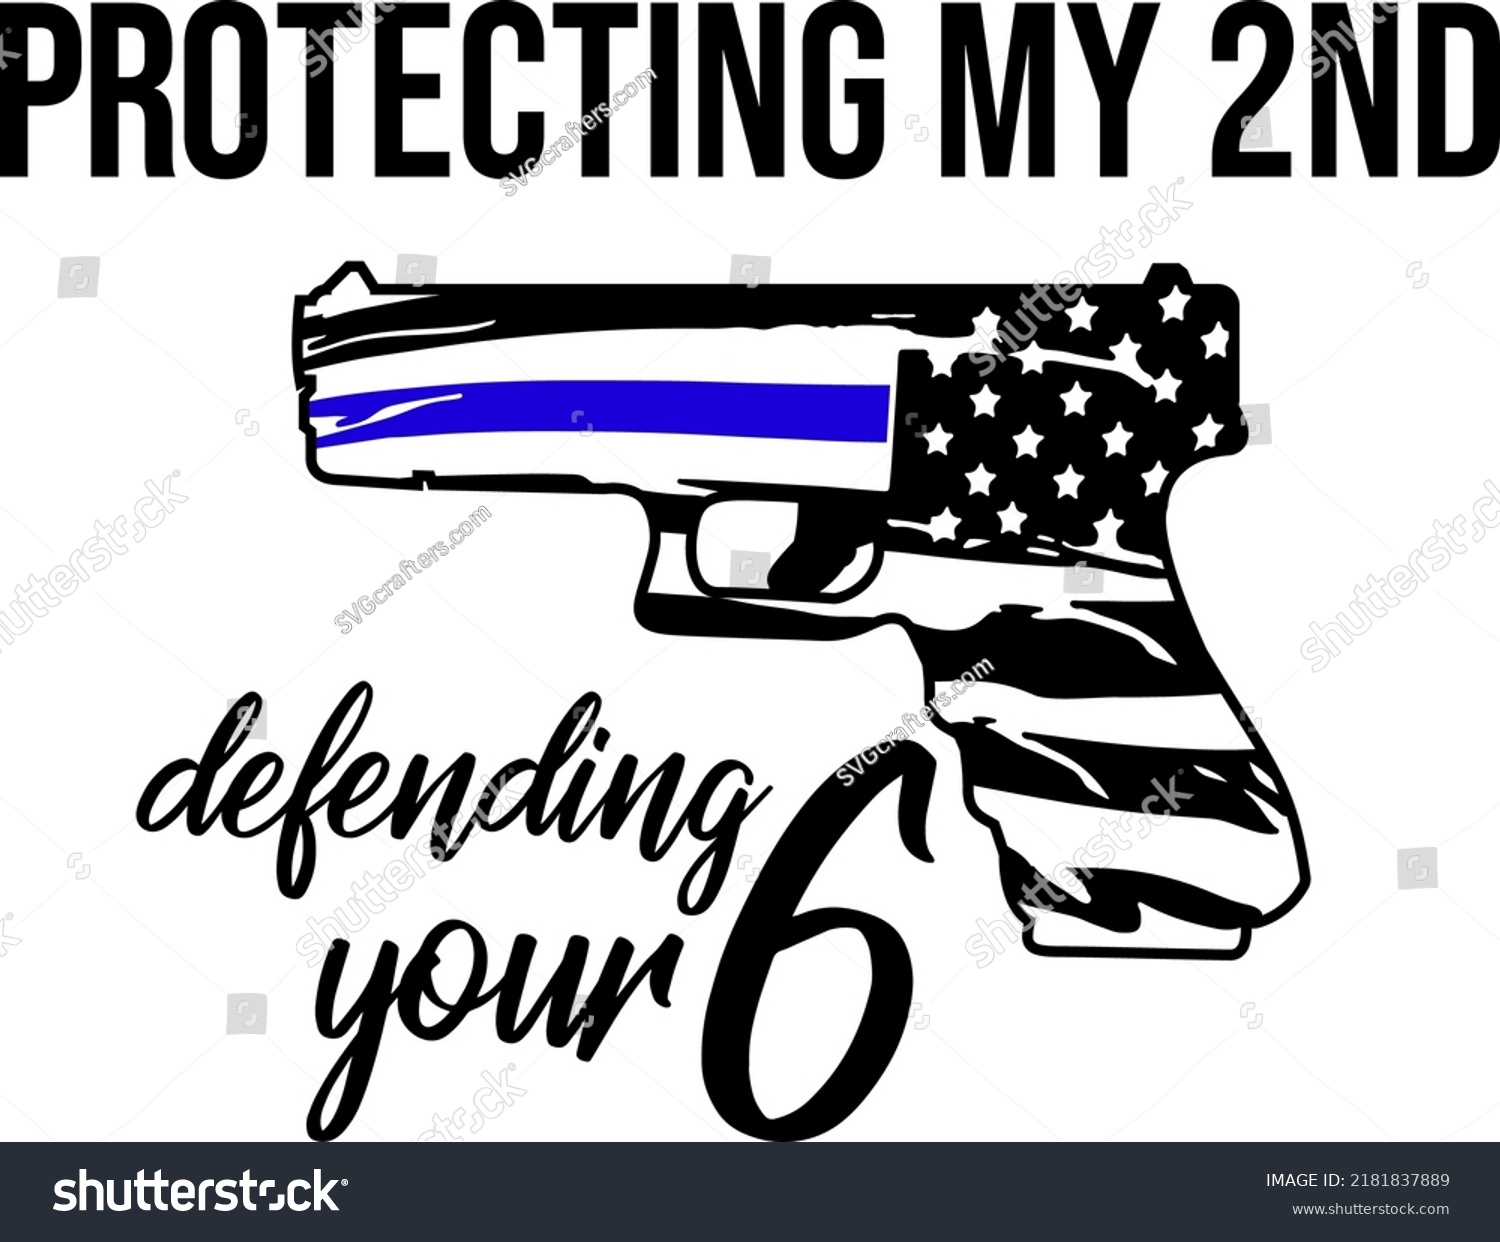 SVG of 2nd amendment Vector, Protecting my 2nd Blue Lives Matter Vector svg